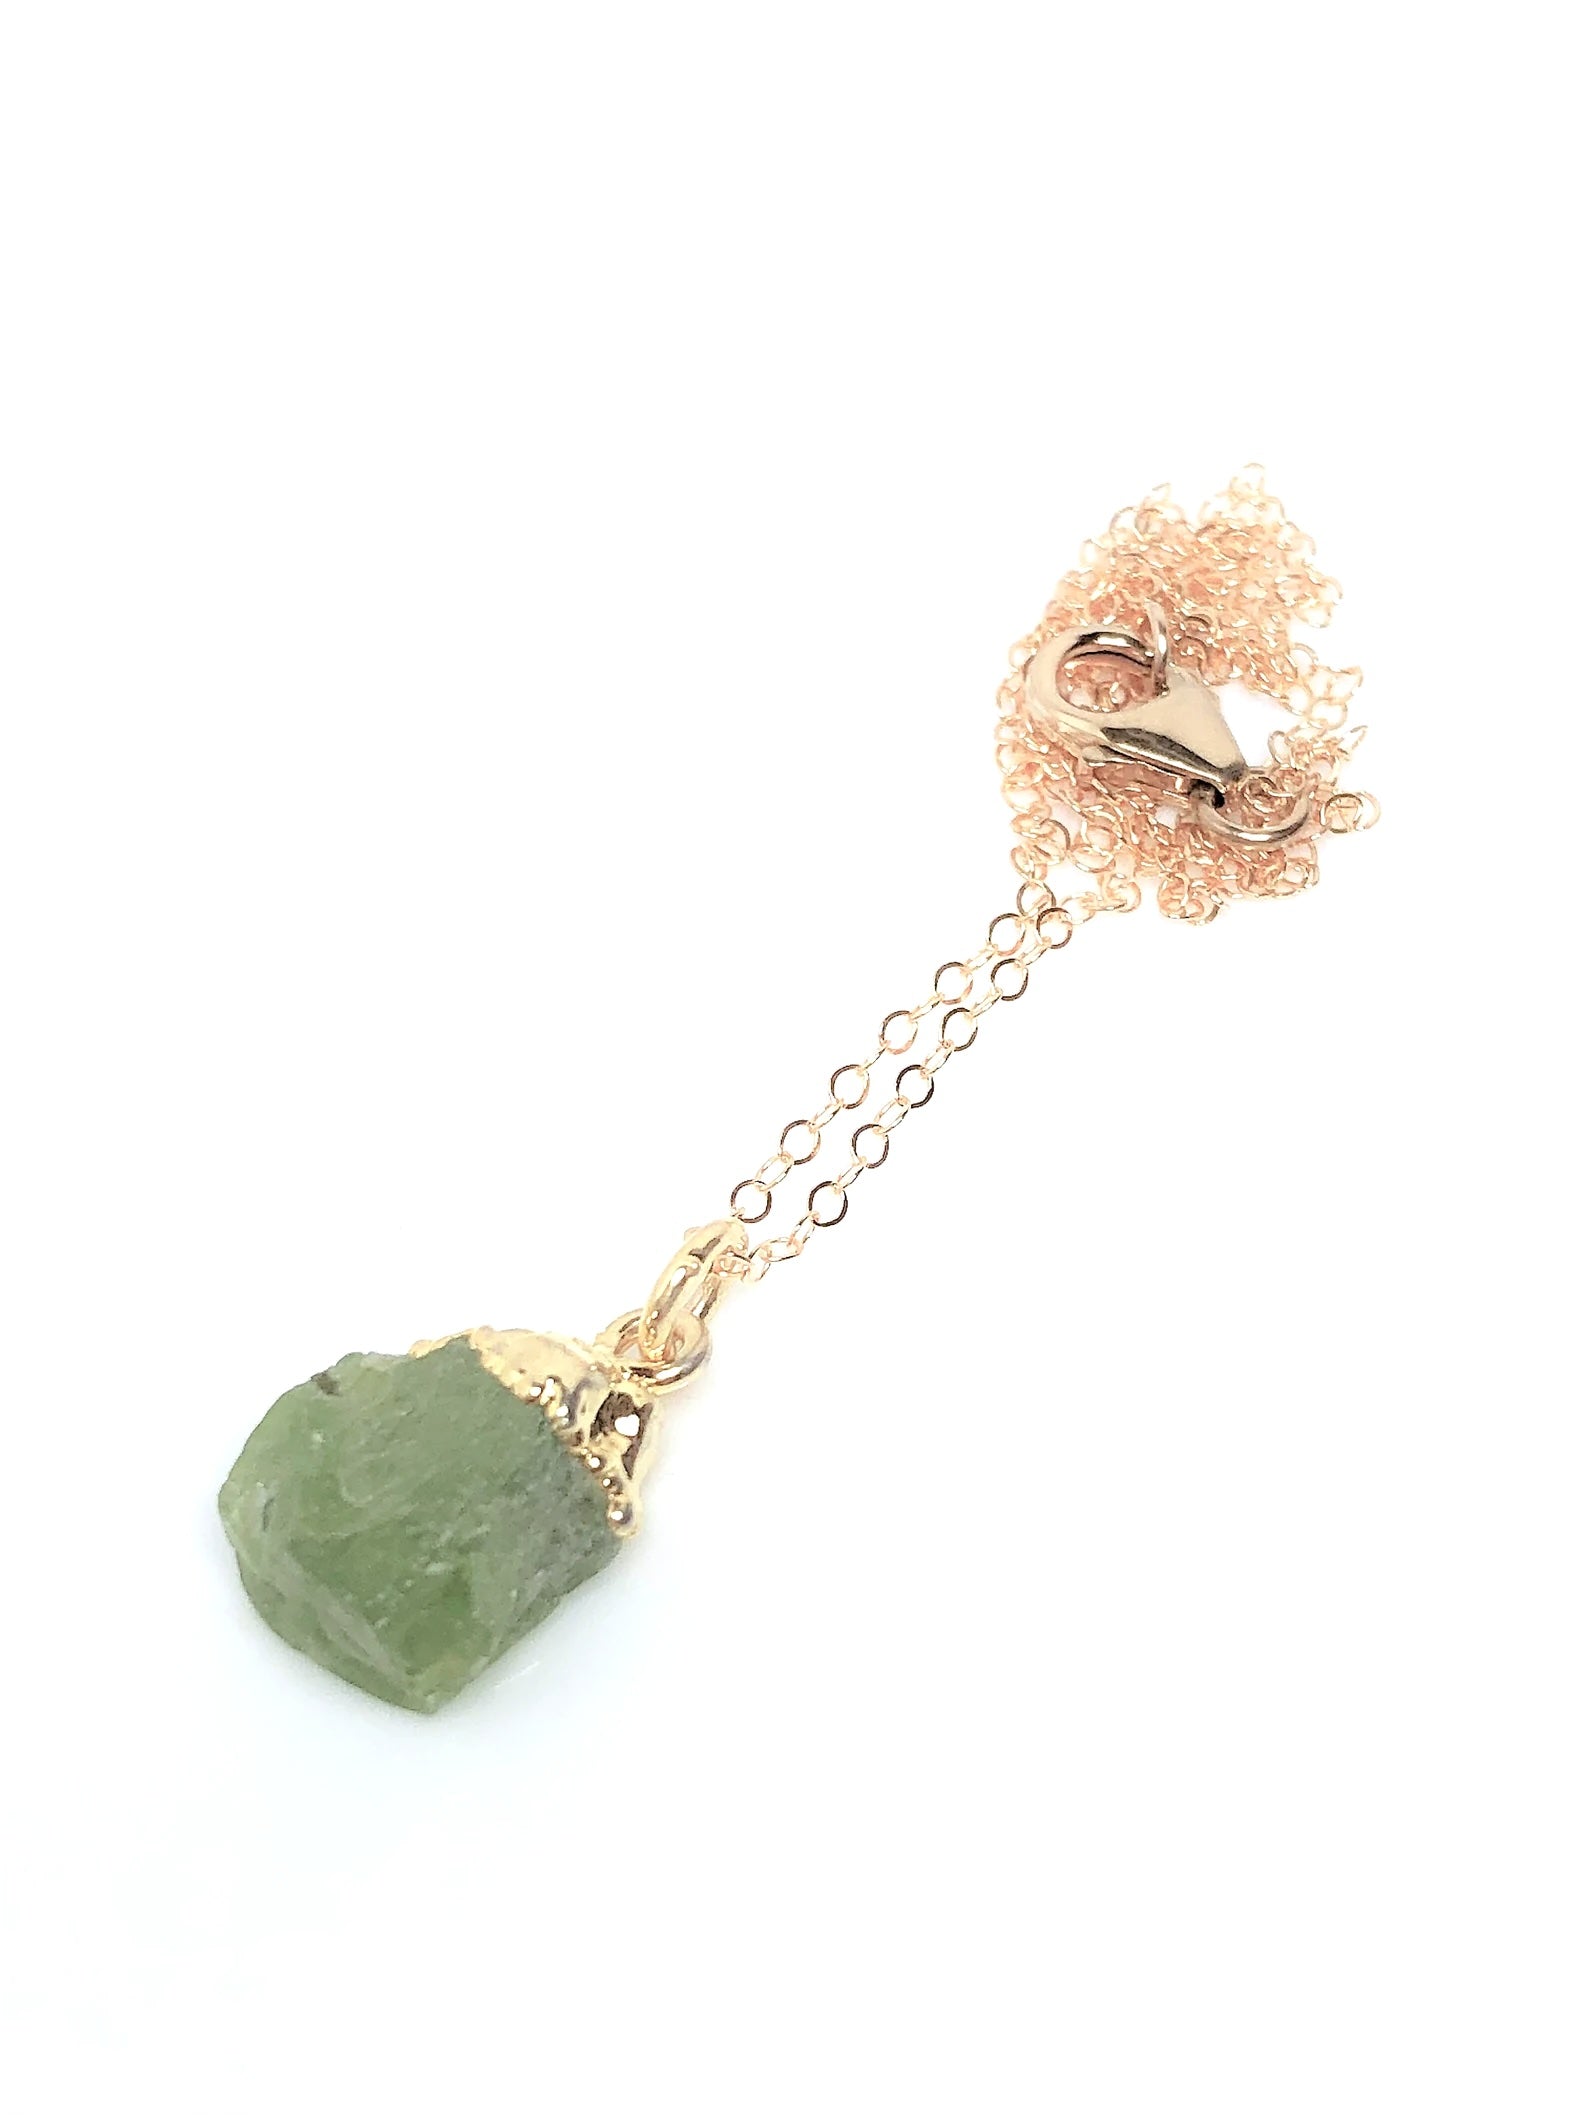 Peridot Necklace, Gold Filled, Raw Green Nugget Pendant, Natural Stone, Minimalist Crystal Necklace, Freeform Gemstone, Gifts For Women